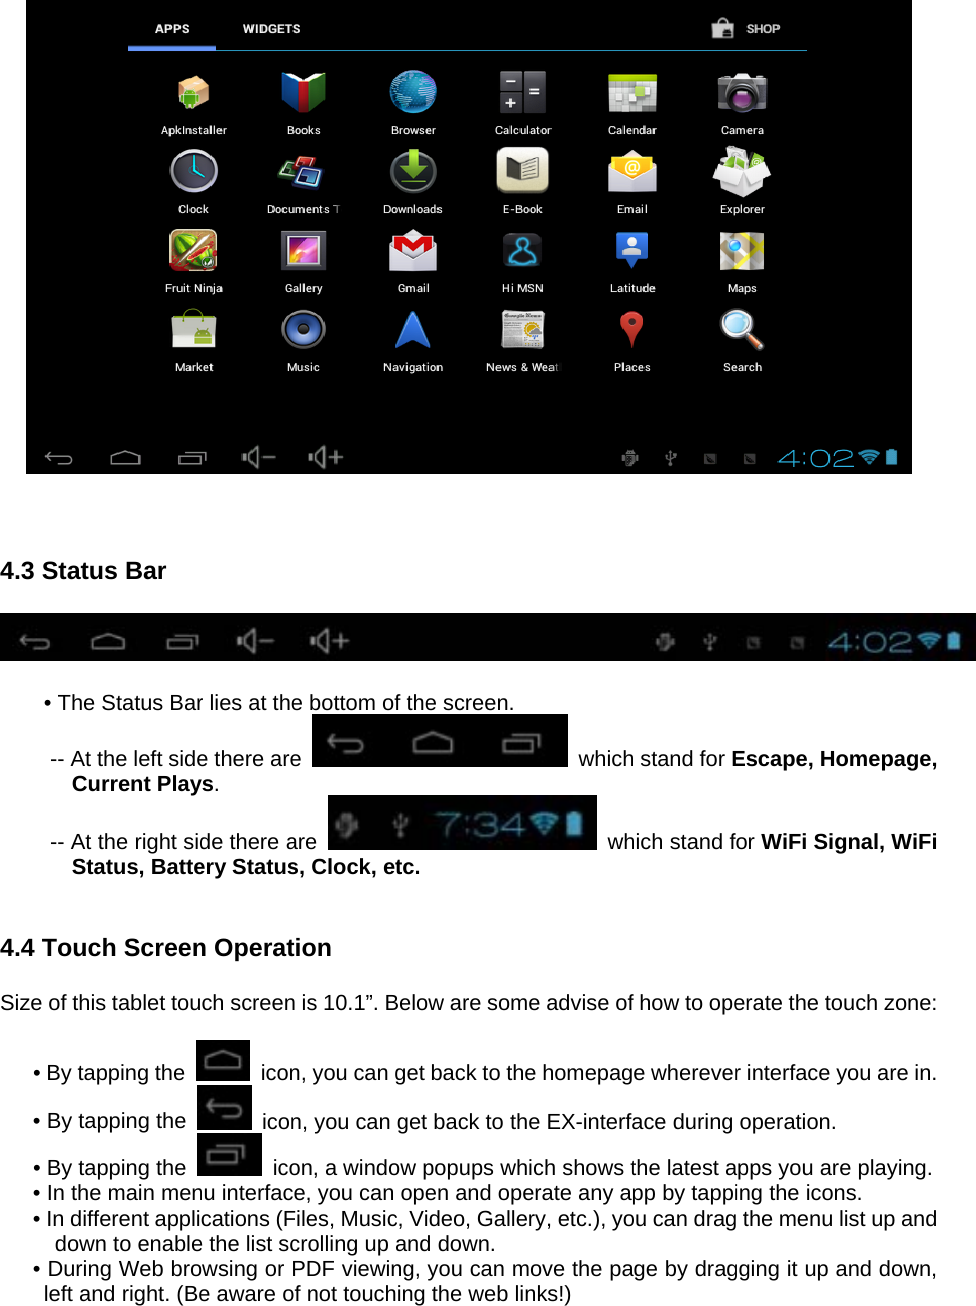      4.3 Status Bar    • The Status Bar lies at the bottom of the screen. -- At the left side there are   which stand for Escape, Homepage, Current Plays. -- At the right side there are    which stand for WiFi Signal, WiFi Status, Battery Status, Clock, etc.   4.4 Touch Screen Operation  Size of this tablet touch screen is 10.1”. Below are some advise of how to operate the touch zone:    • By tapping the    icon, you can get back to the homepage wherever interface you are in. • By tapping the    icon, you can get back to the EX-interface during operation. • By tapping the    icon, a window popups which shows the latest apps you are playing. • In the main menu interface, you can open and operate any app by tapping the icons. • In different applications (Files, Music, Video, Gallery, etc.), you can drag the menu list up and down to enable the list scrolling up and down. • During Web browsing or PDF viewing, you can move the page by dragging it up and down, left and right. (Be aware of not touching the web links!) 